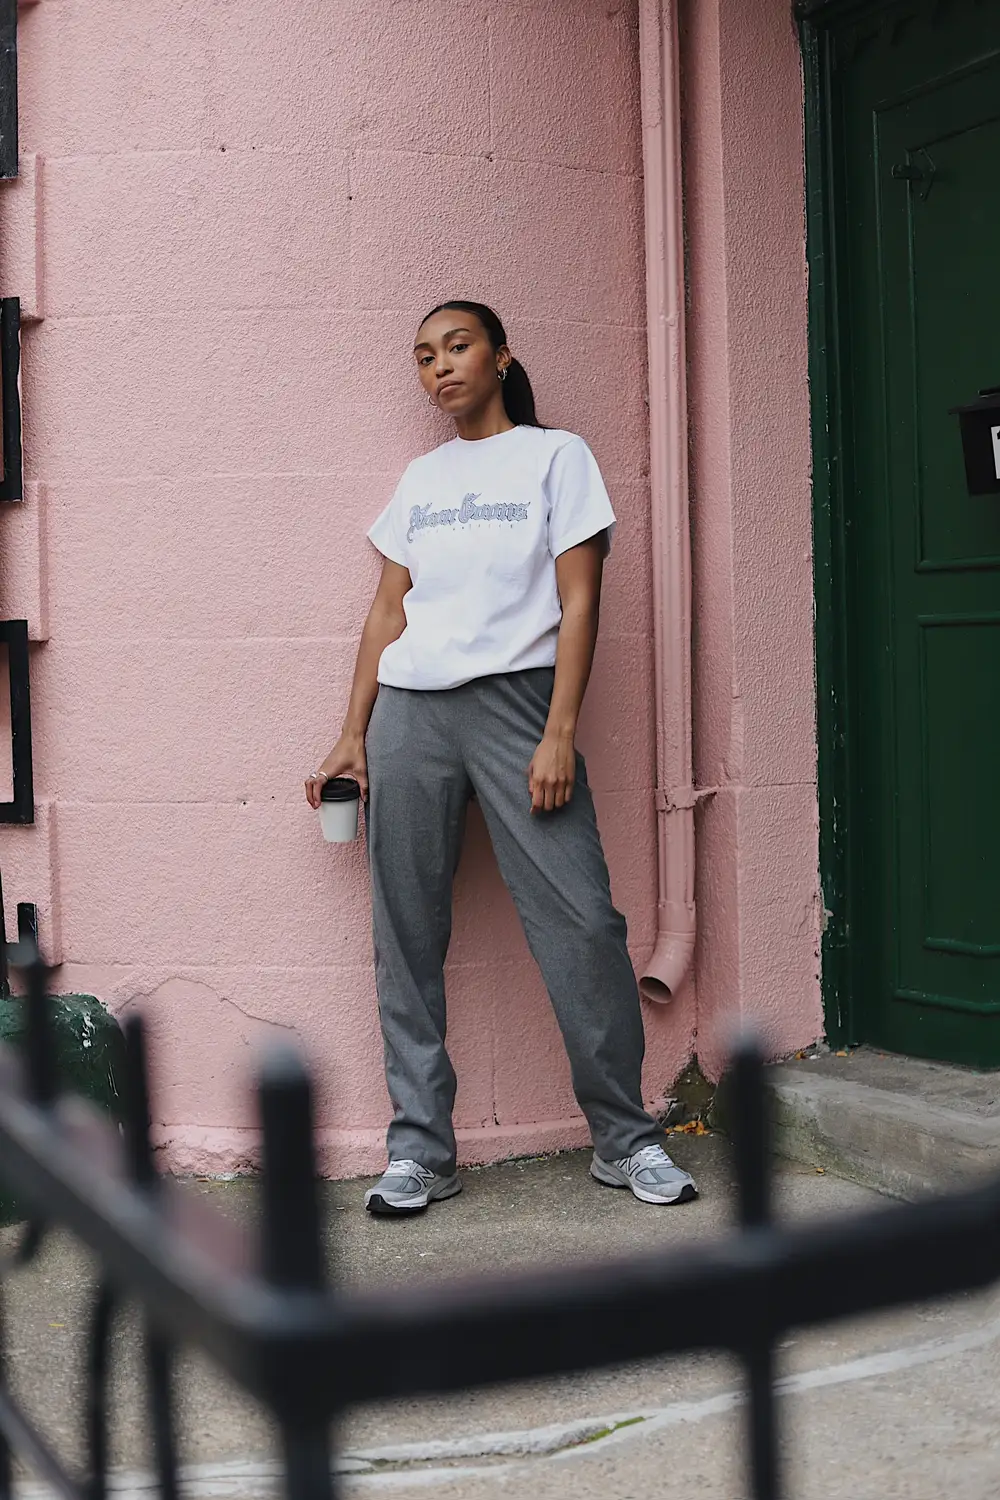 Woman in white t-shirt and grey sweatpants holding coffee cup